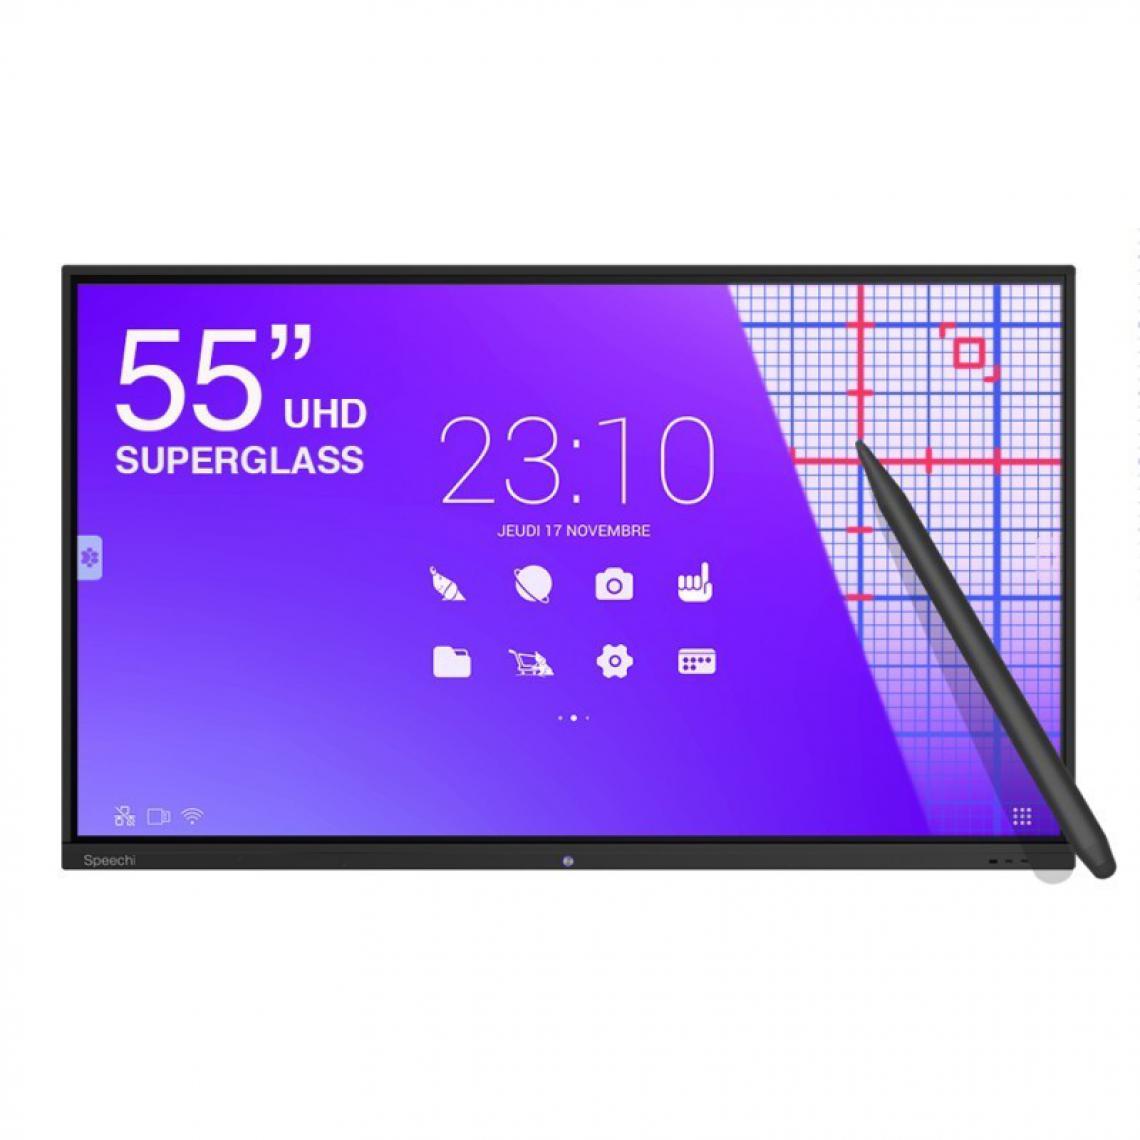 Speechi - Ecran interactif tactile Haute Précision SuperGlass Android SpeechiTouch UHD - 55" - Tablette Android